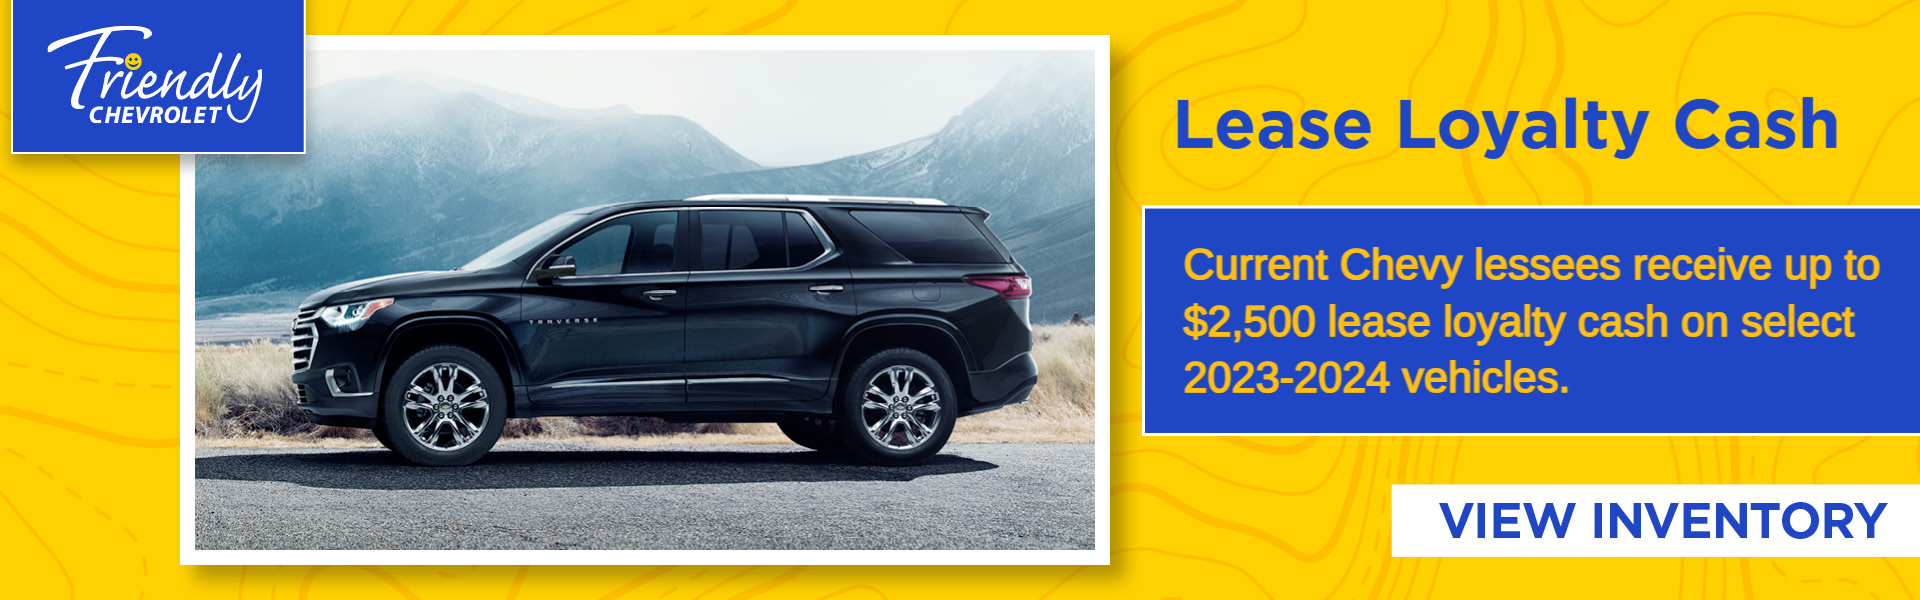 Get up to $2500 Lease Loyalty Cash on Select Models